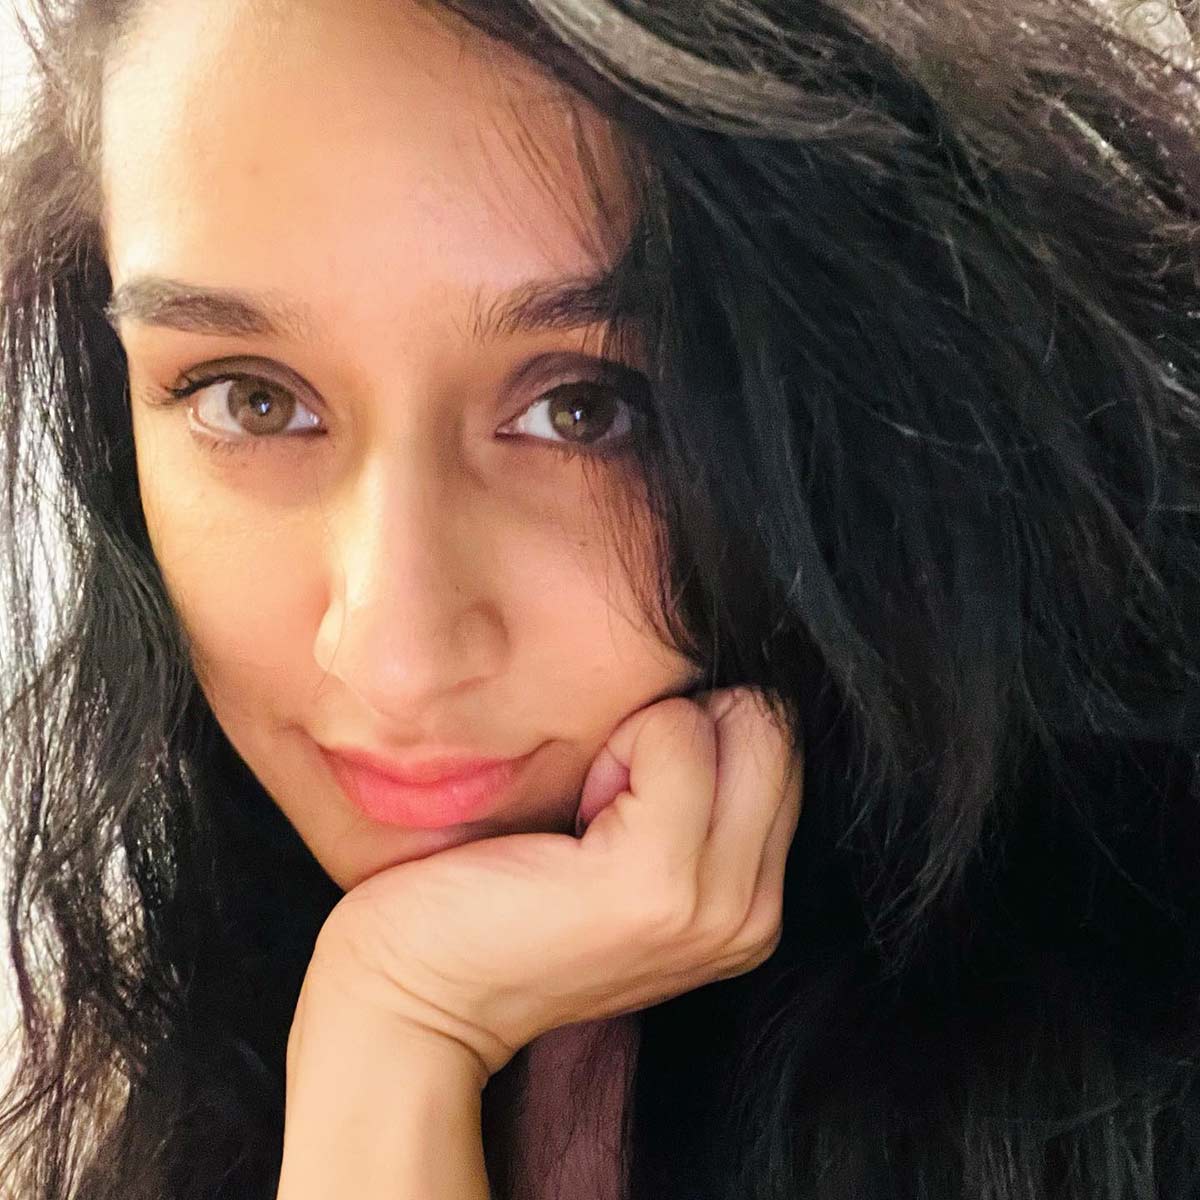 Shraddha Says It With Her Eyes - Rediff.com movies